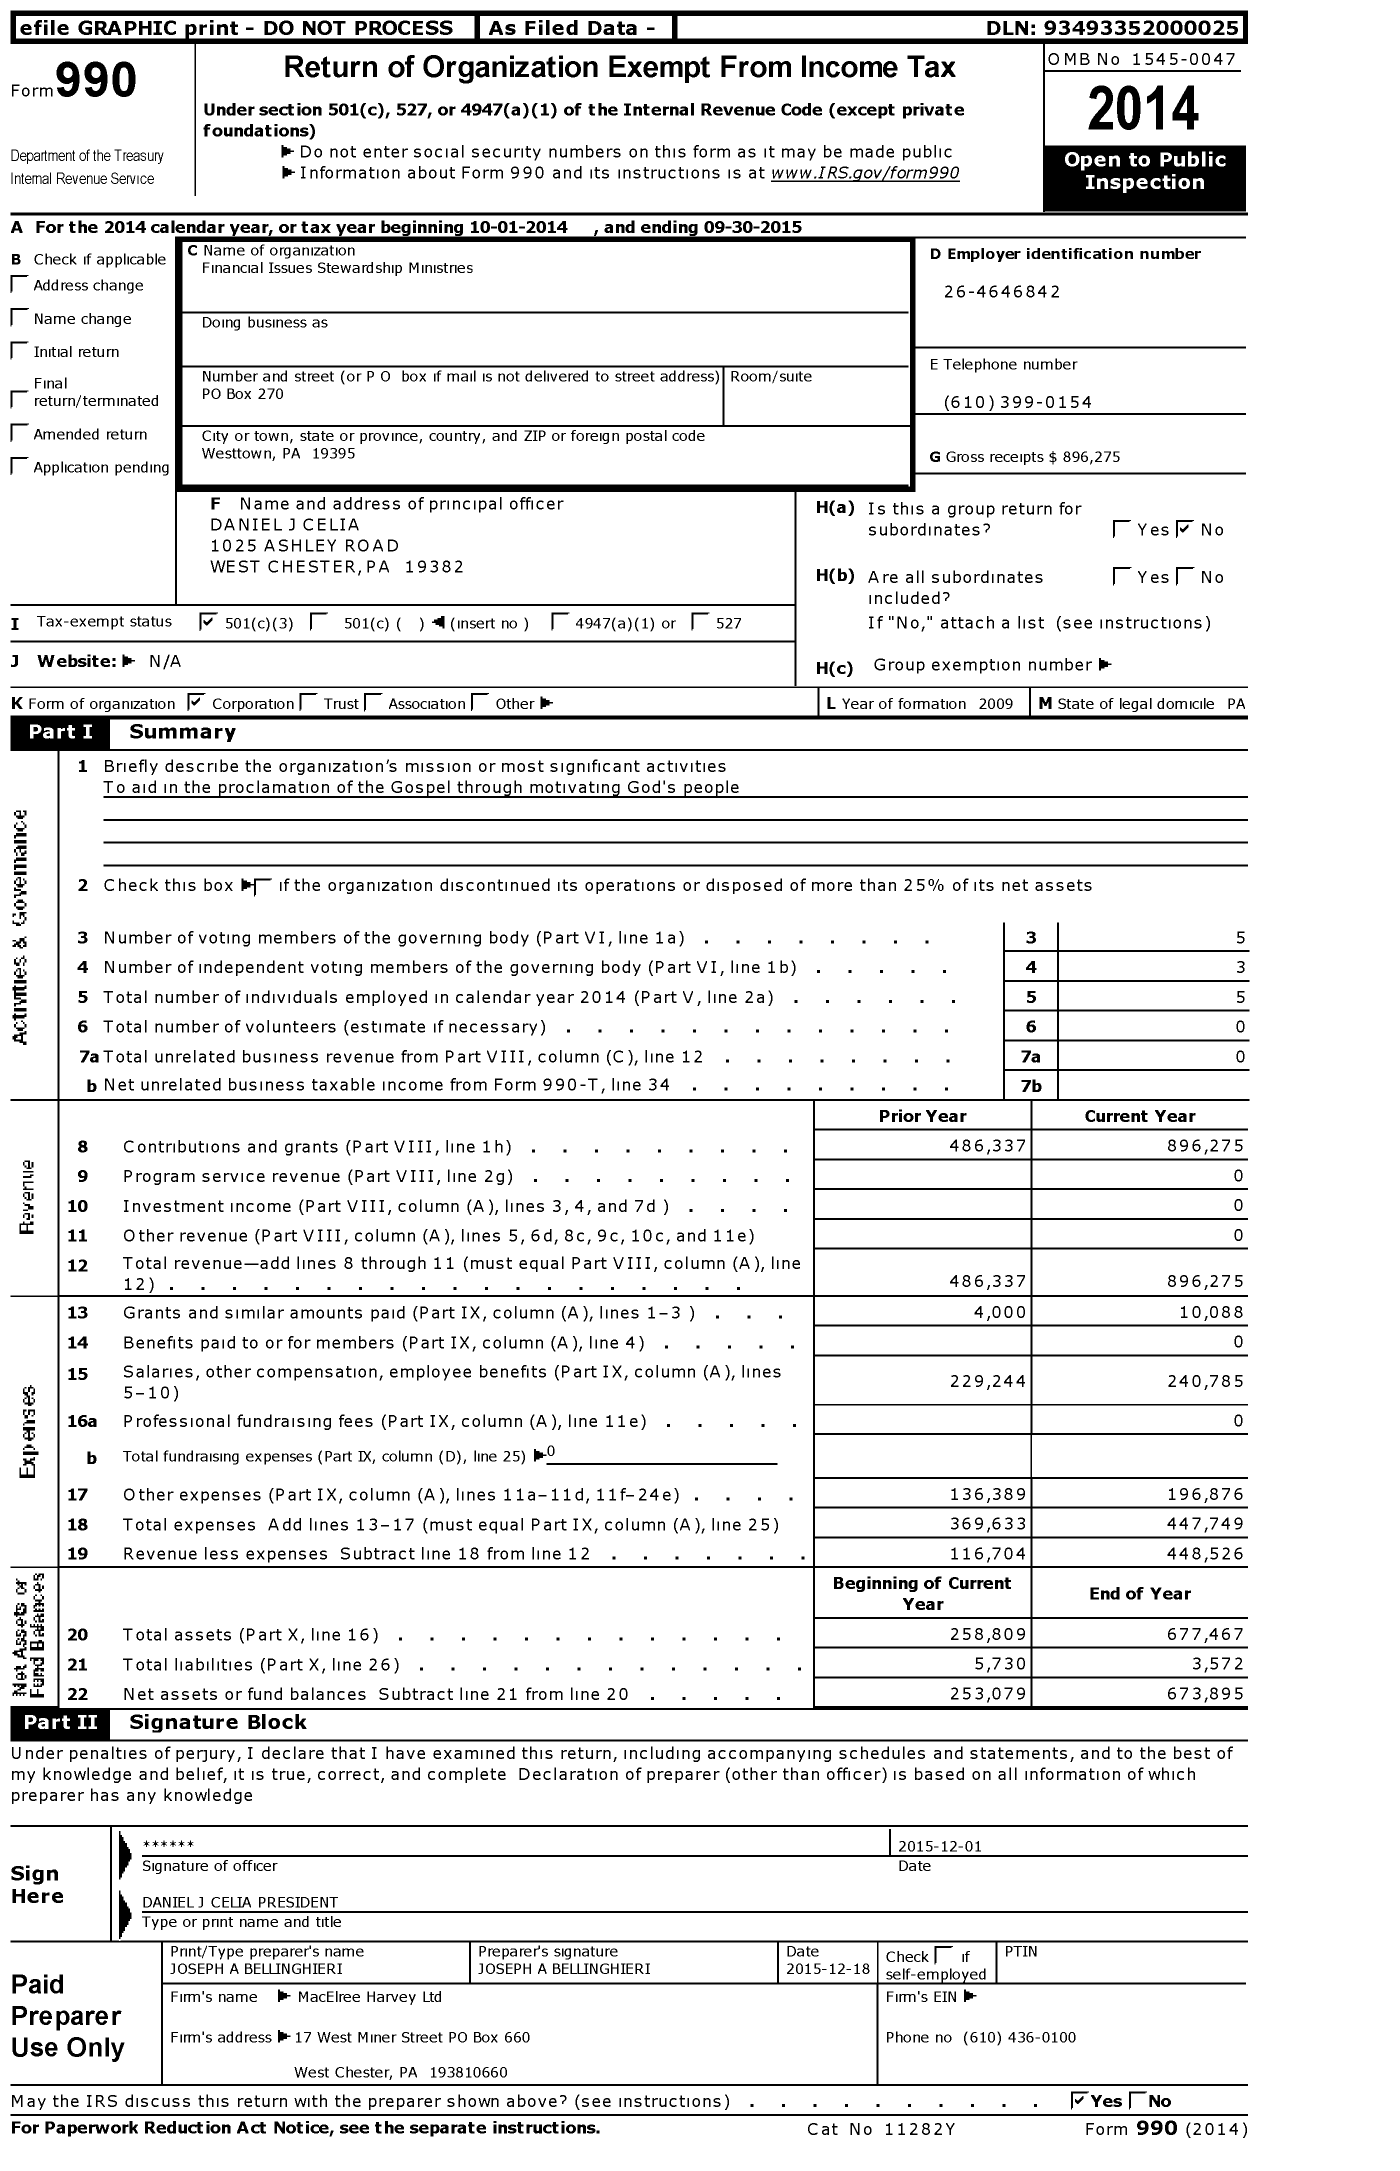 Image of first page of 2014 Form 990 for Financial Issues Stewardship Ministries (FISM)